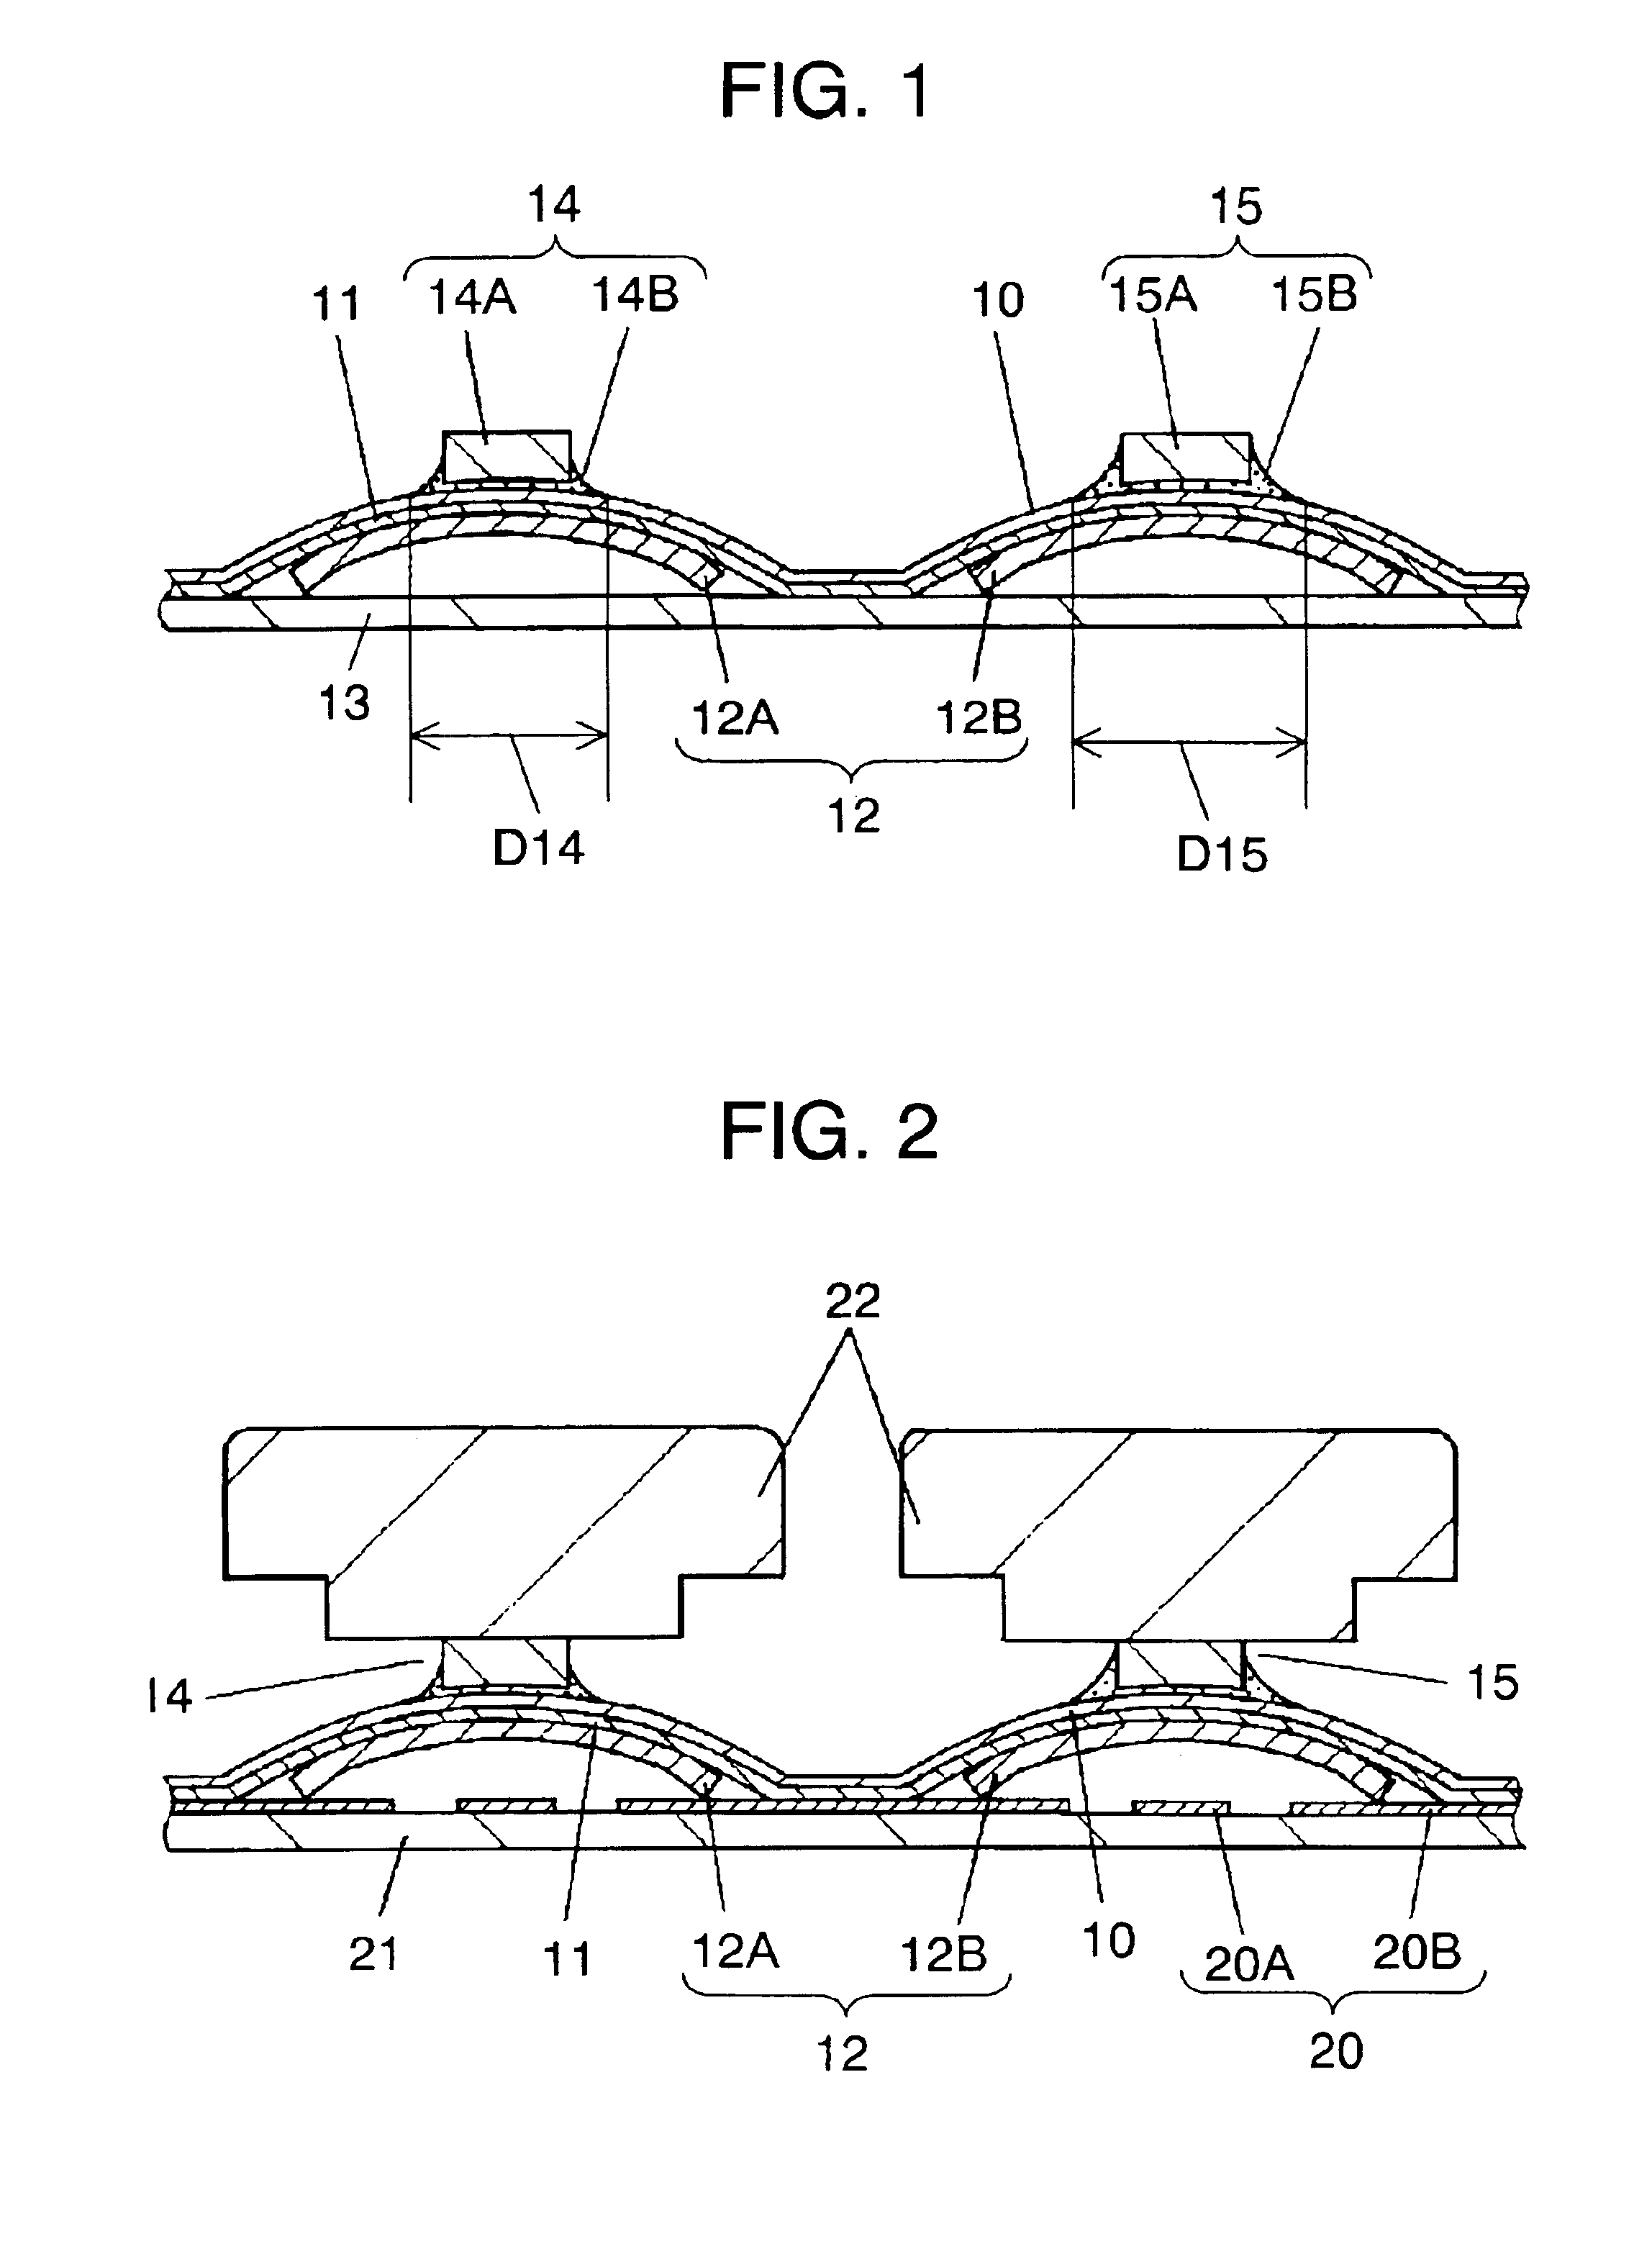 Movable contact unit with operating projections, method of mounting operating projections and operating panel switch using movable contact unit with operating projections